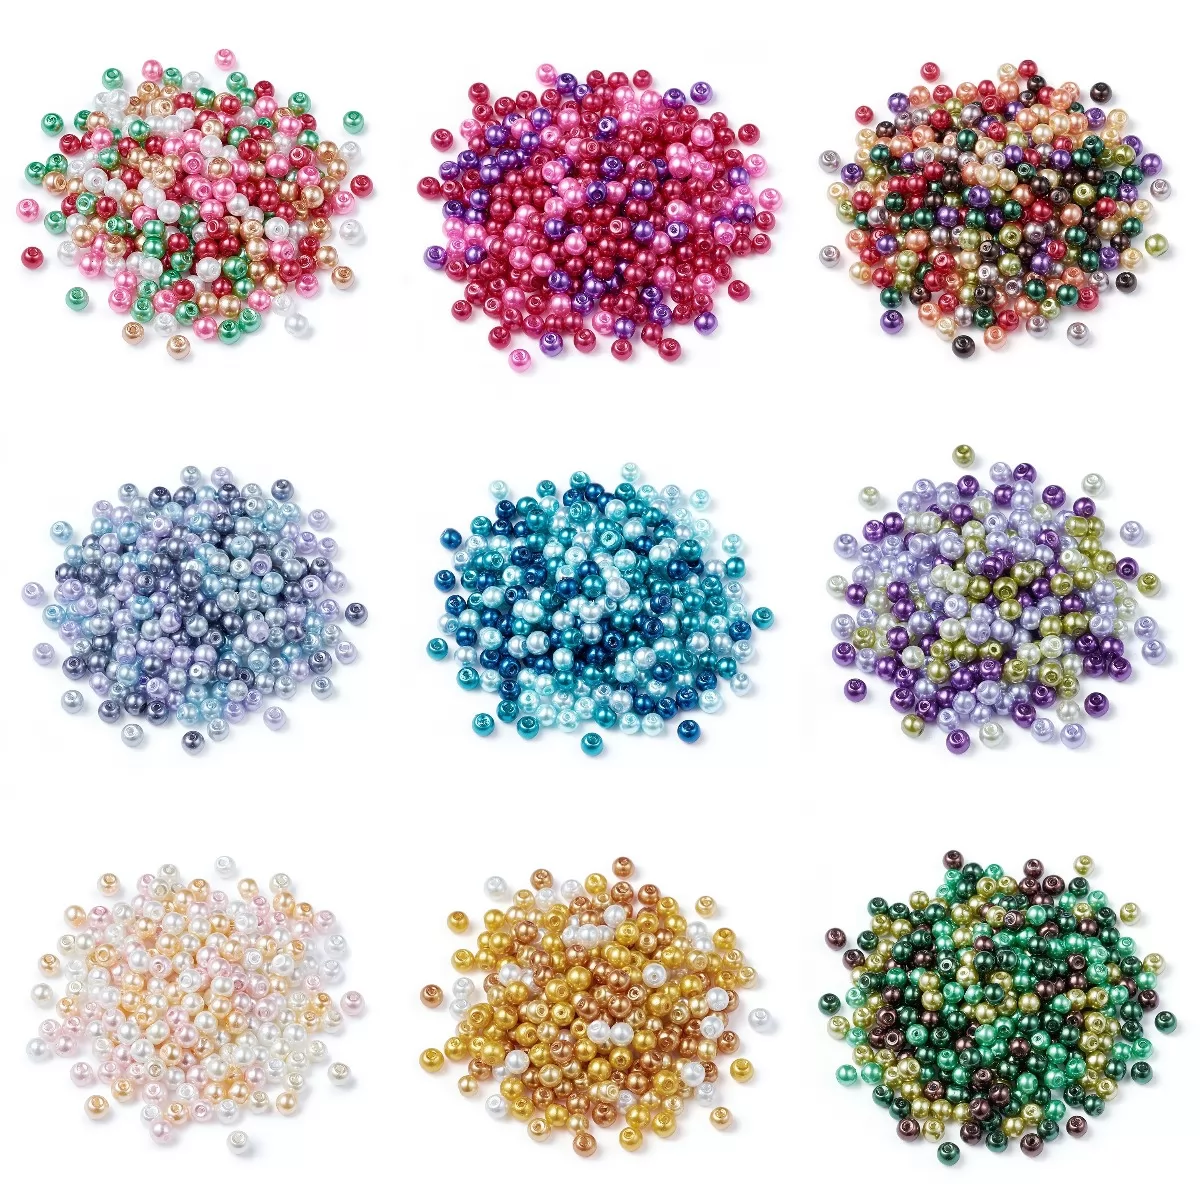 1 Bag Mixed Color Pearlized Glass Beads Pearl Beads 4mm/6mm/8mm Beading Jewelry 